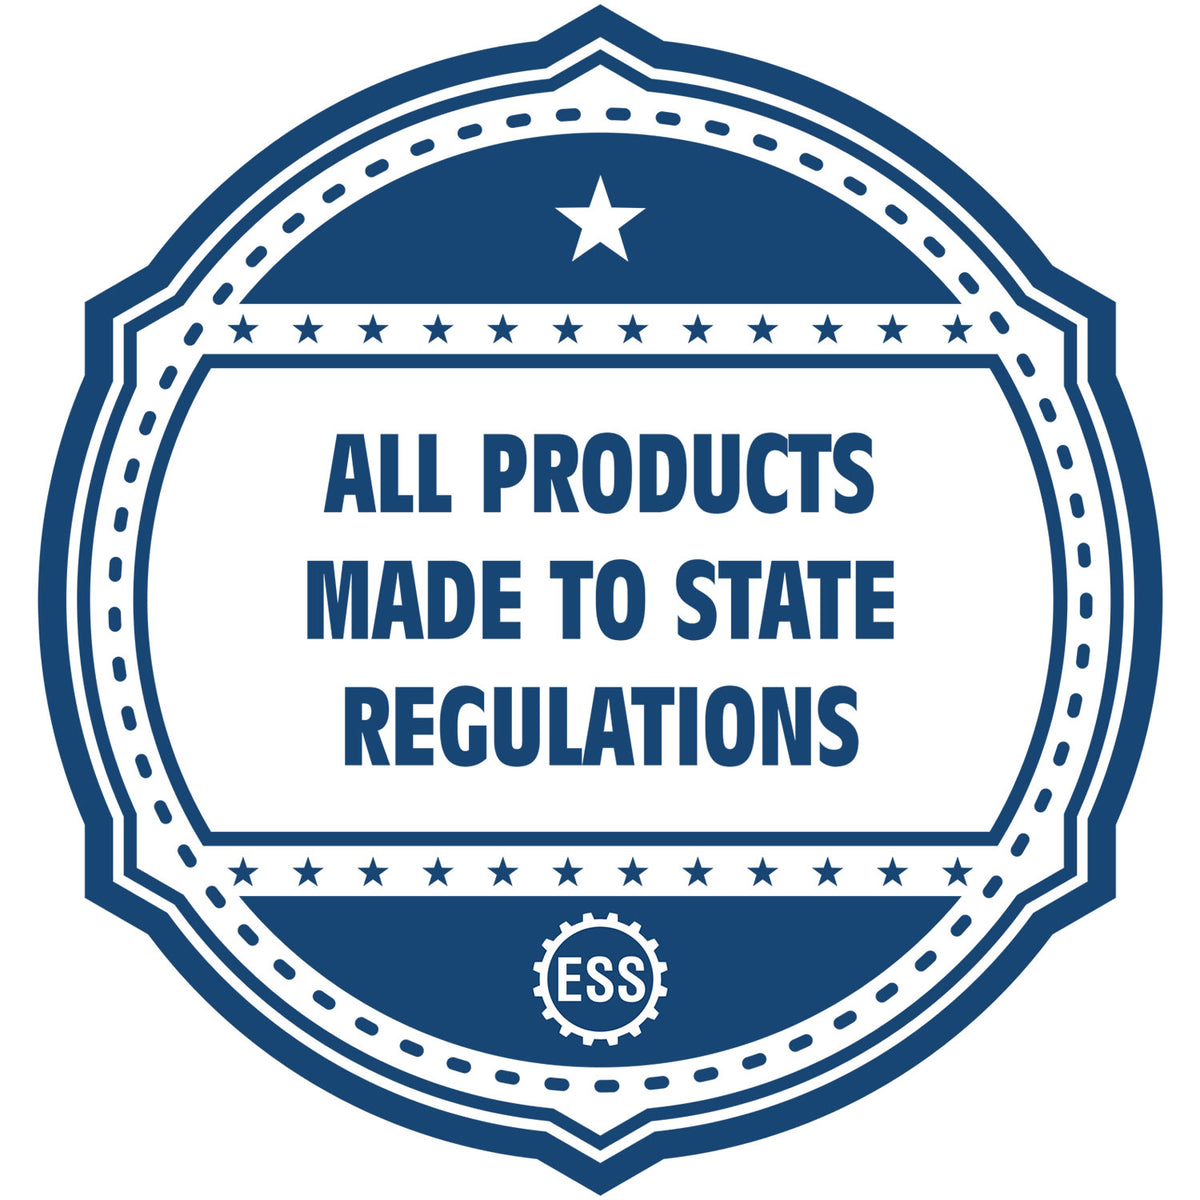 An icon or badge element for the Digital Vermont PE Stamp and Electronic Seal for Vermont Engineer showing that this product is made in compliance with state regulations.